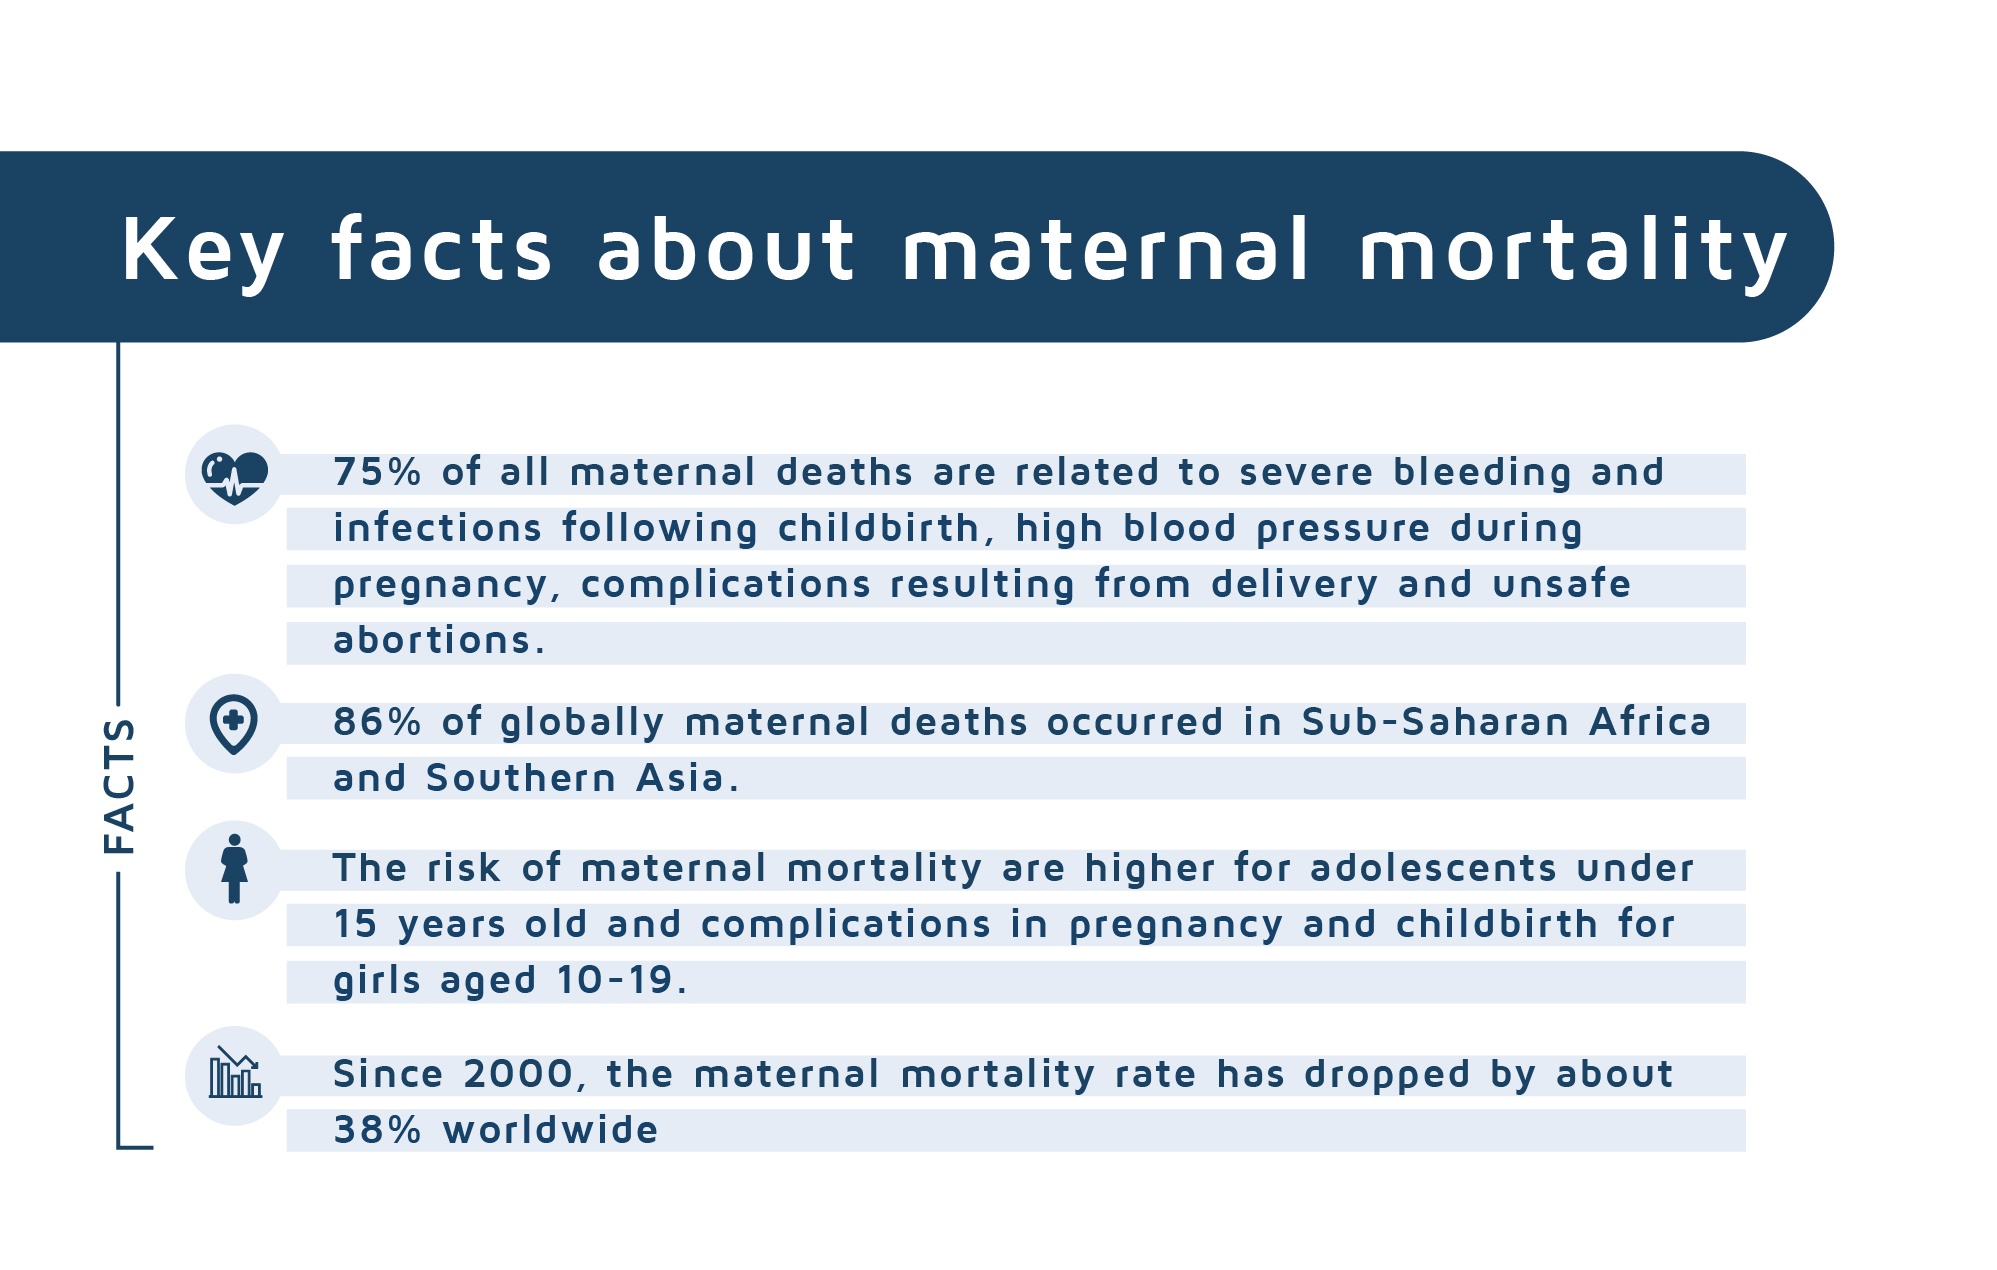 Key facts about maternal mortality